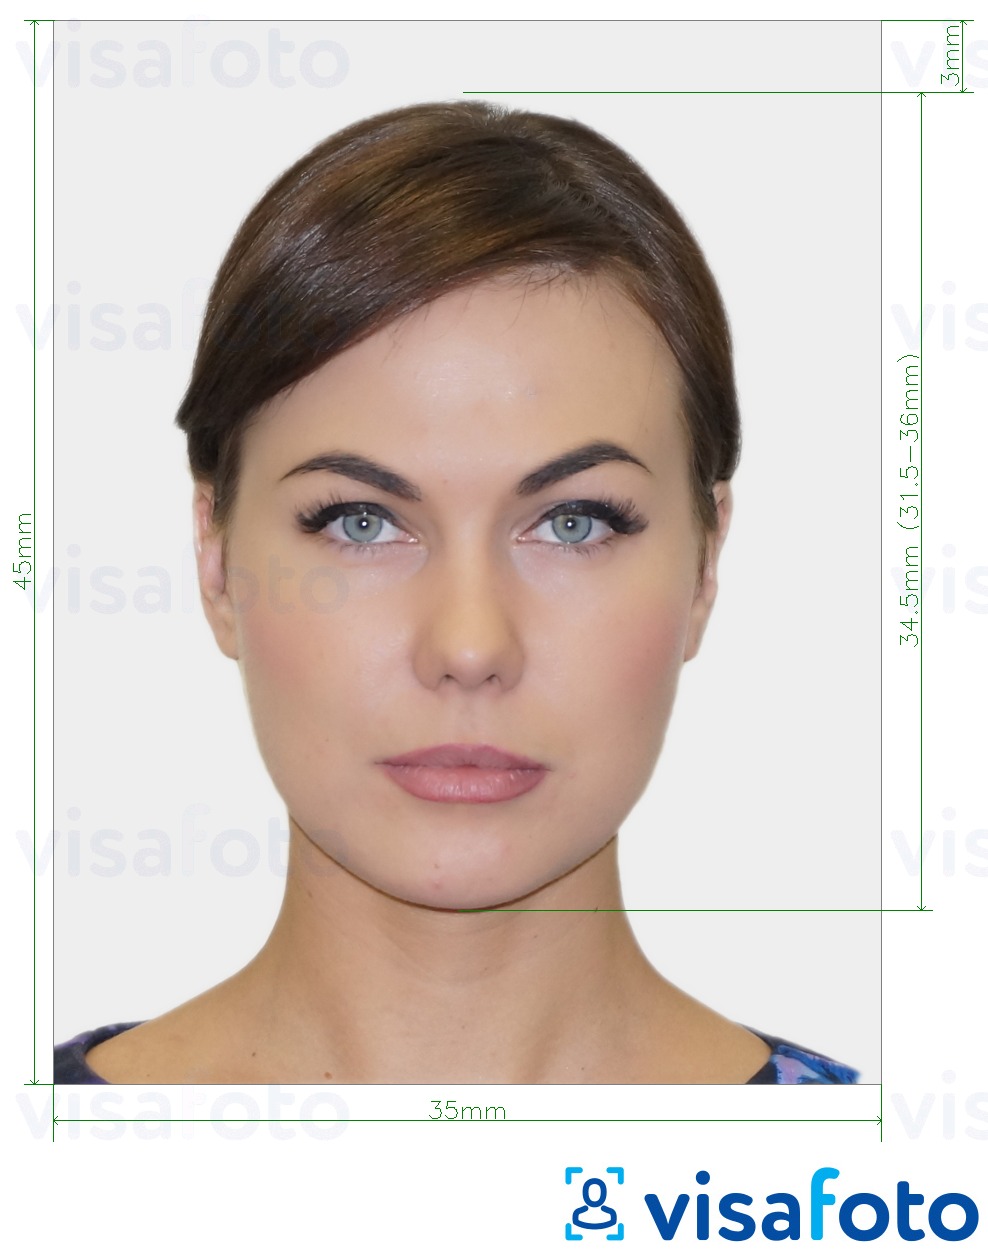 Example of photo for Switzerland Visa 35x45 mm (3.5x4.5 cm) with exact size specification